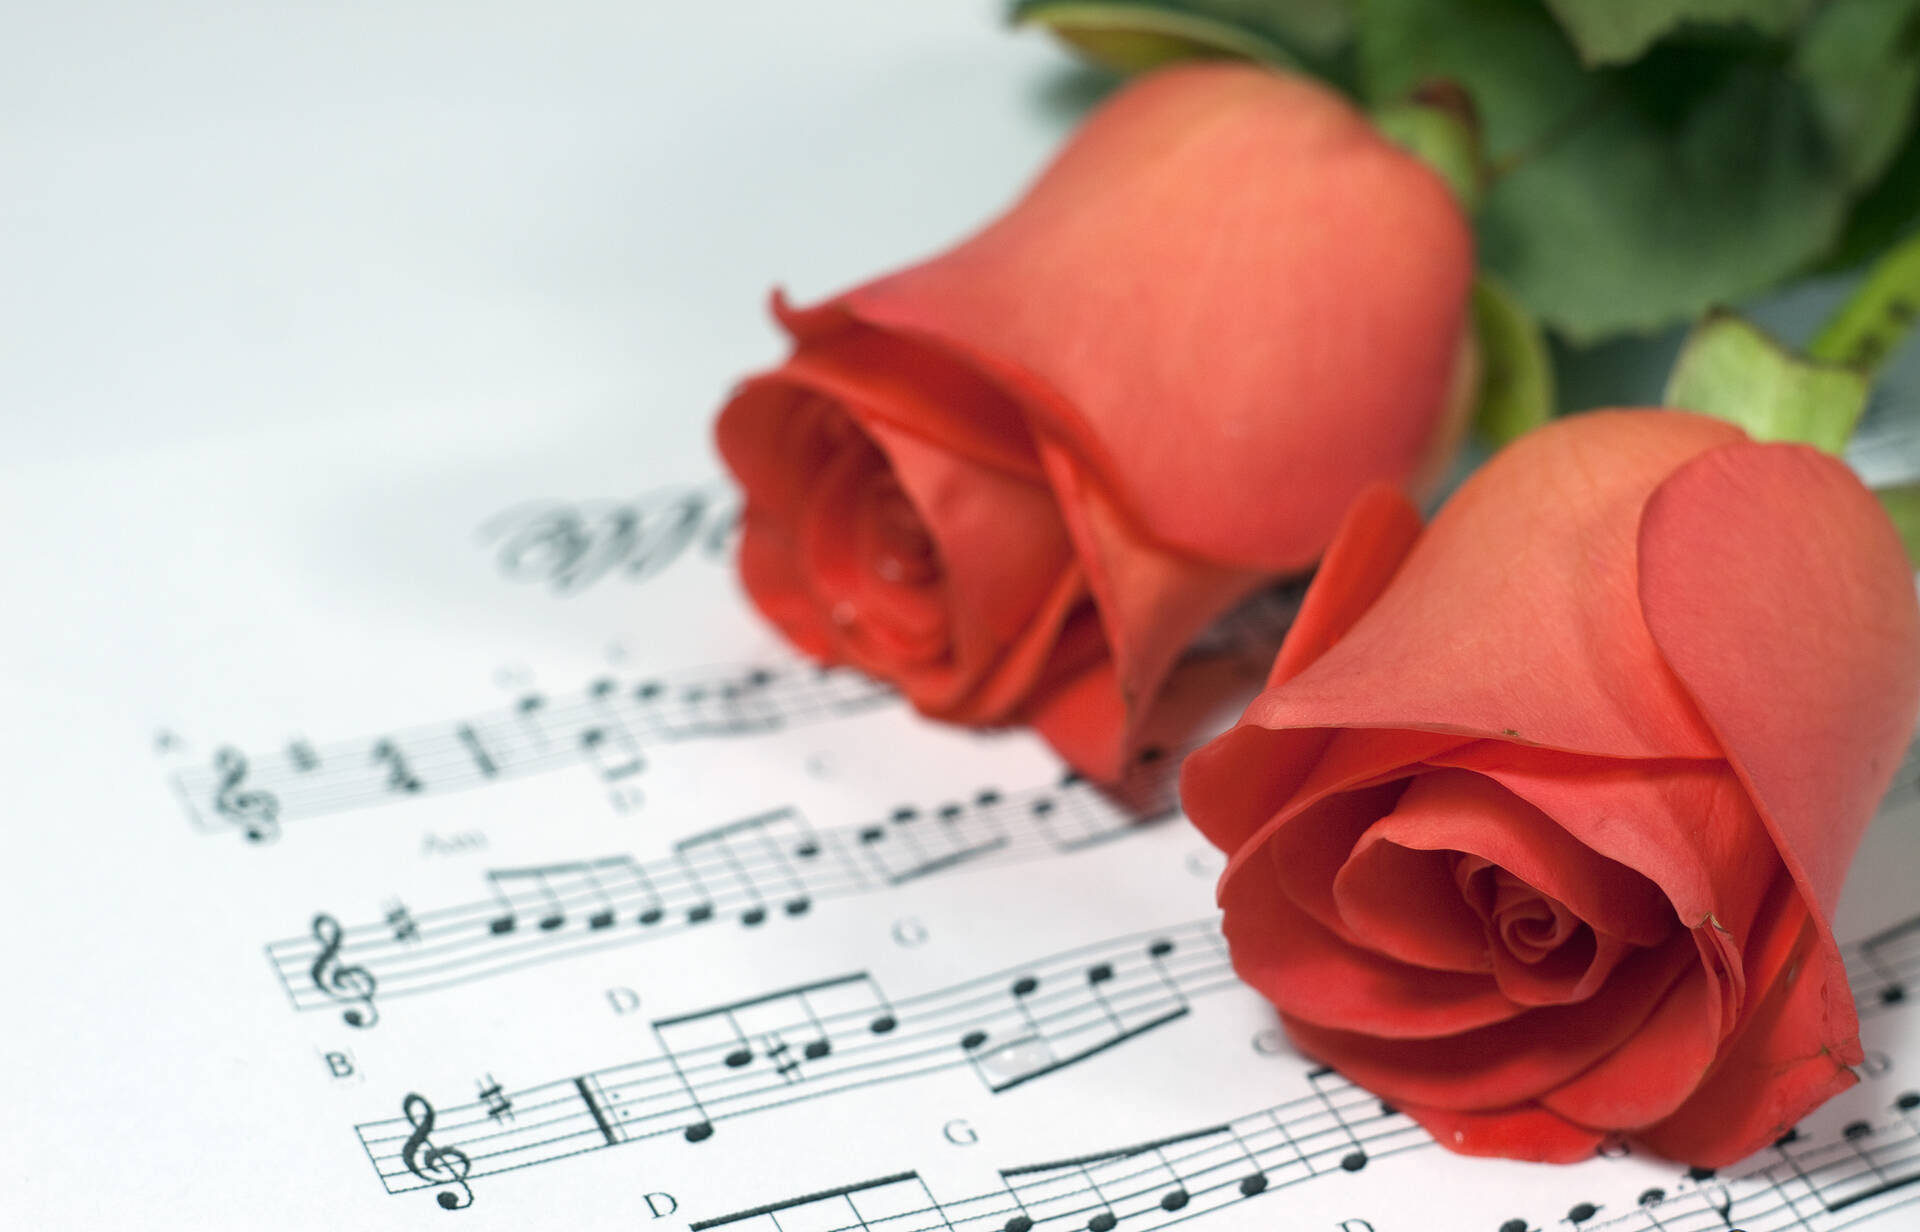 Two Roses Over Music Sheet Background